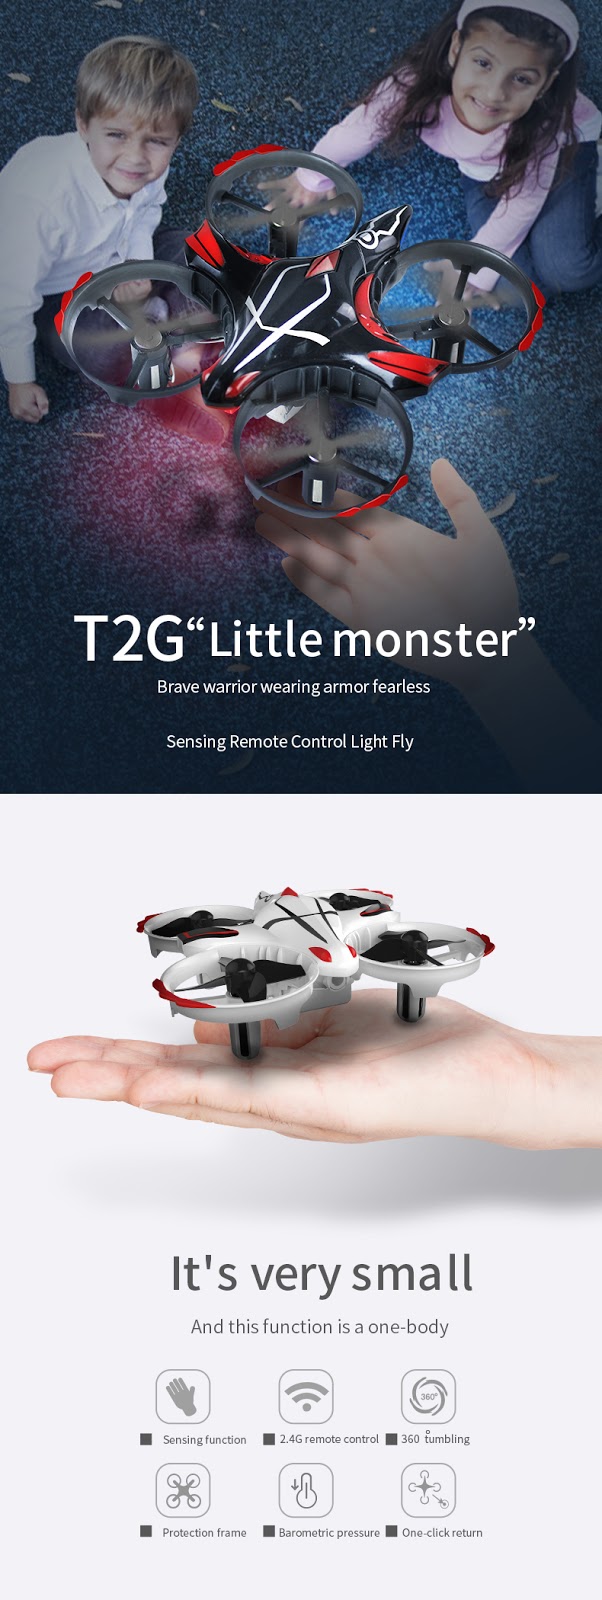 https://c.lazada.co.th/t/c.Bwu?url=https%3A%2F%2Fwww.lazada.co.th%2Fproducts%2Frc-drone-taaiw-t2g-with-transmitter-infrared-sensor-dual-mode-function-air-pressure-high-hold-mode-rc-drone-i260092766-s400568351.html&sub_aff_id=drone6&sub_id1=2019